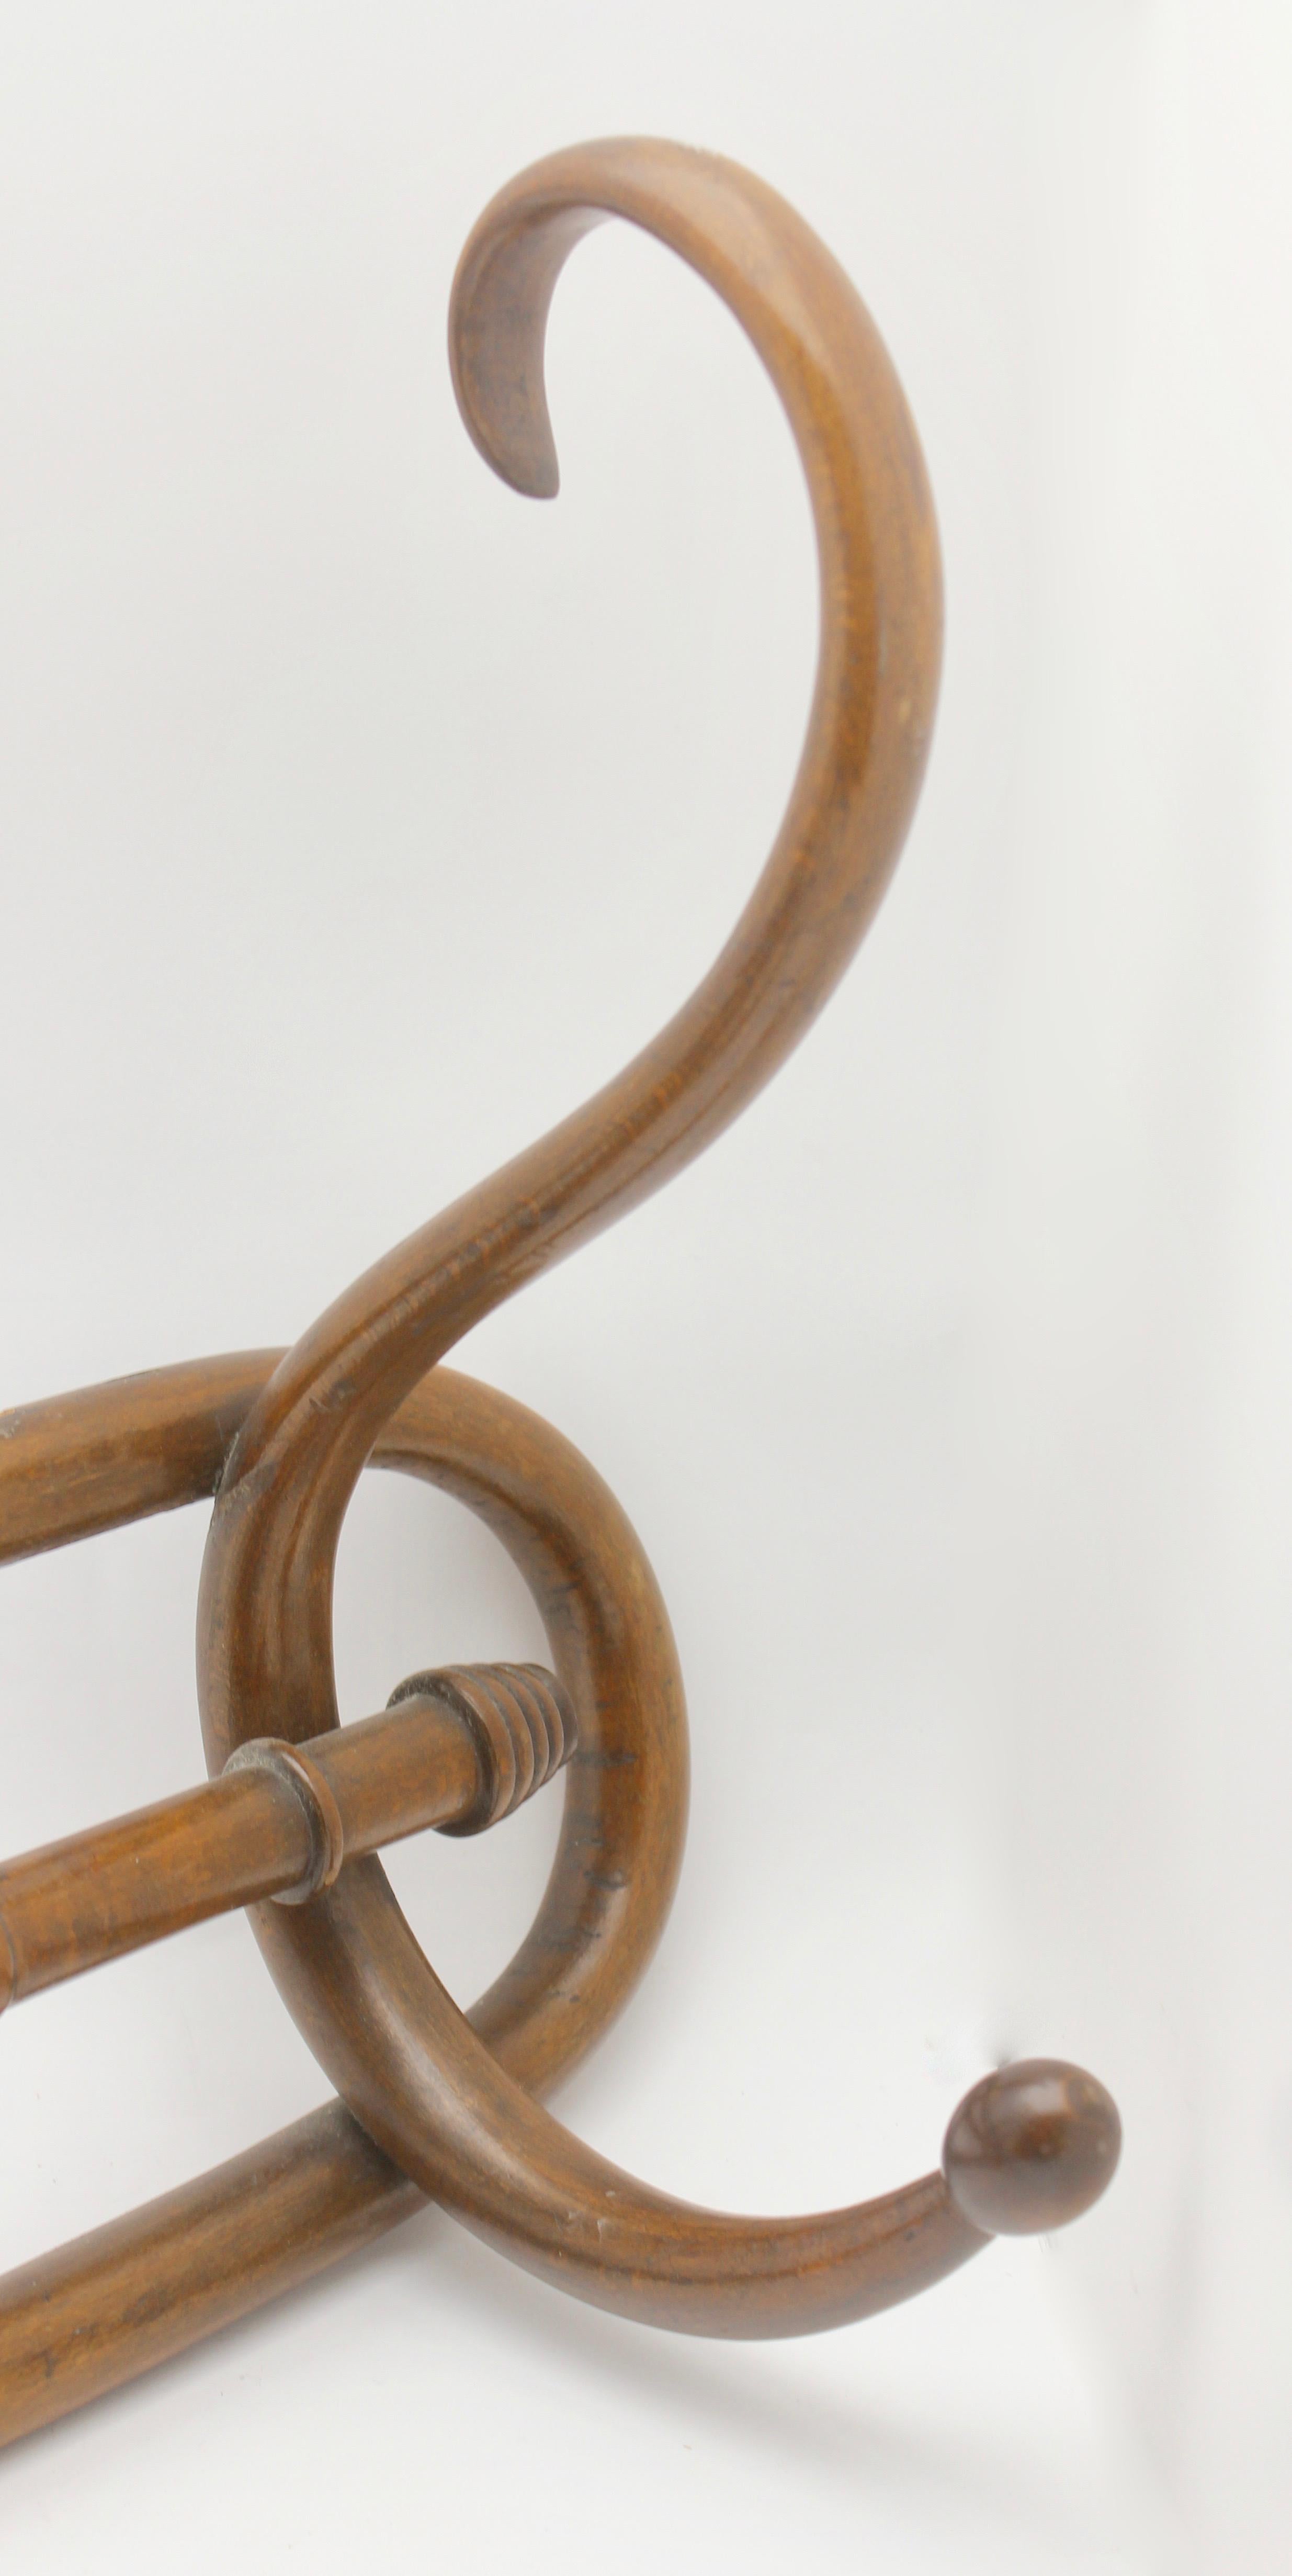 Hand-Crafted Art Nouveau Bentwood Wall Coat Rack attributed to Thonet, Vienna, 1910s